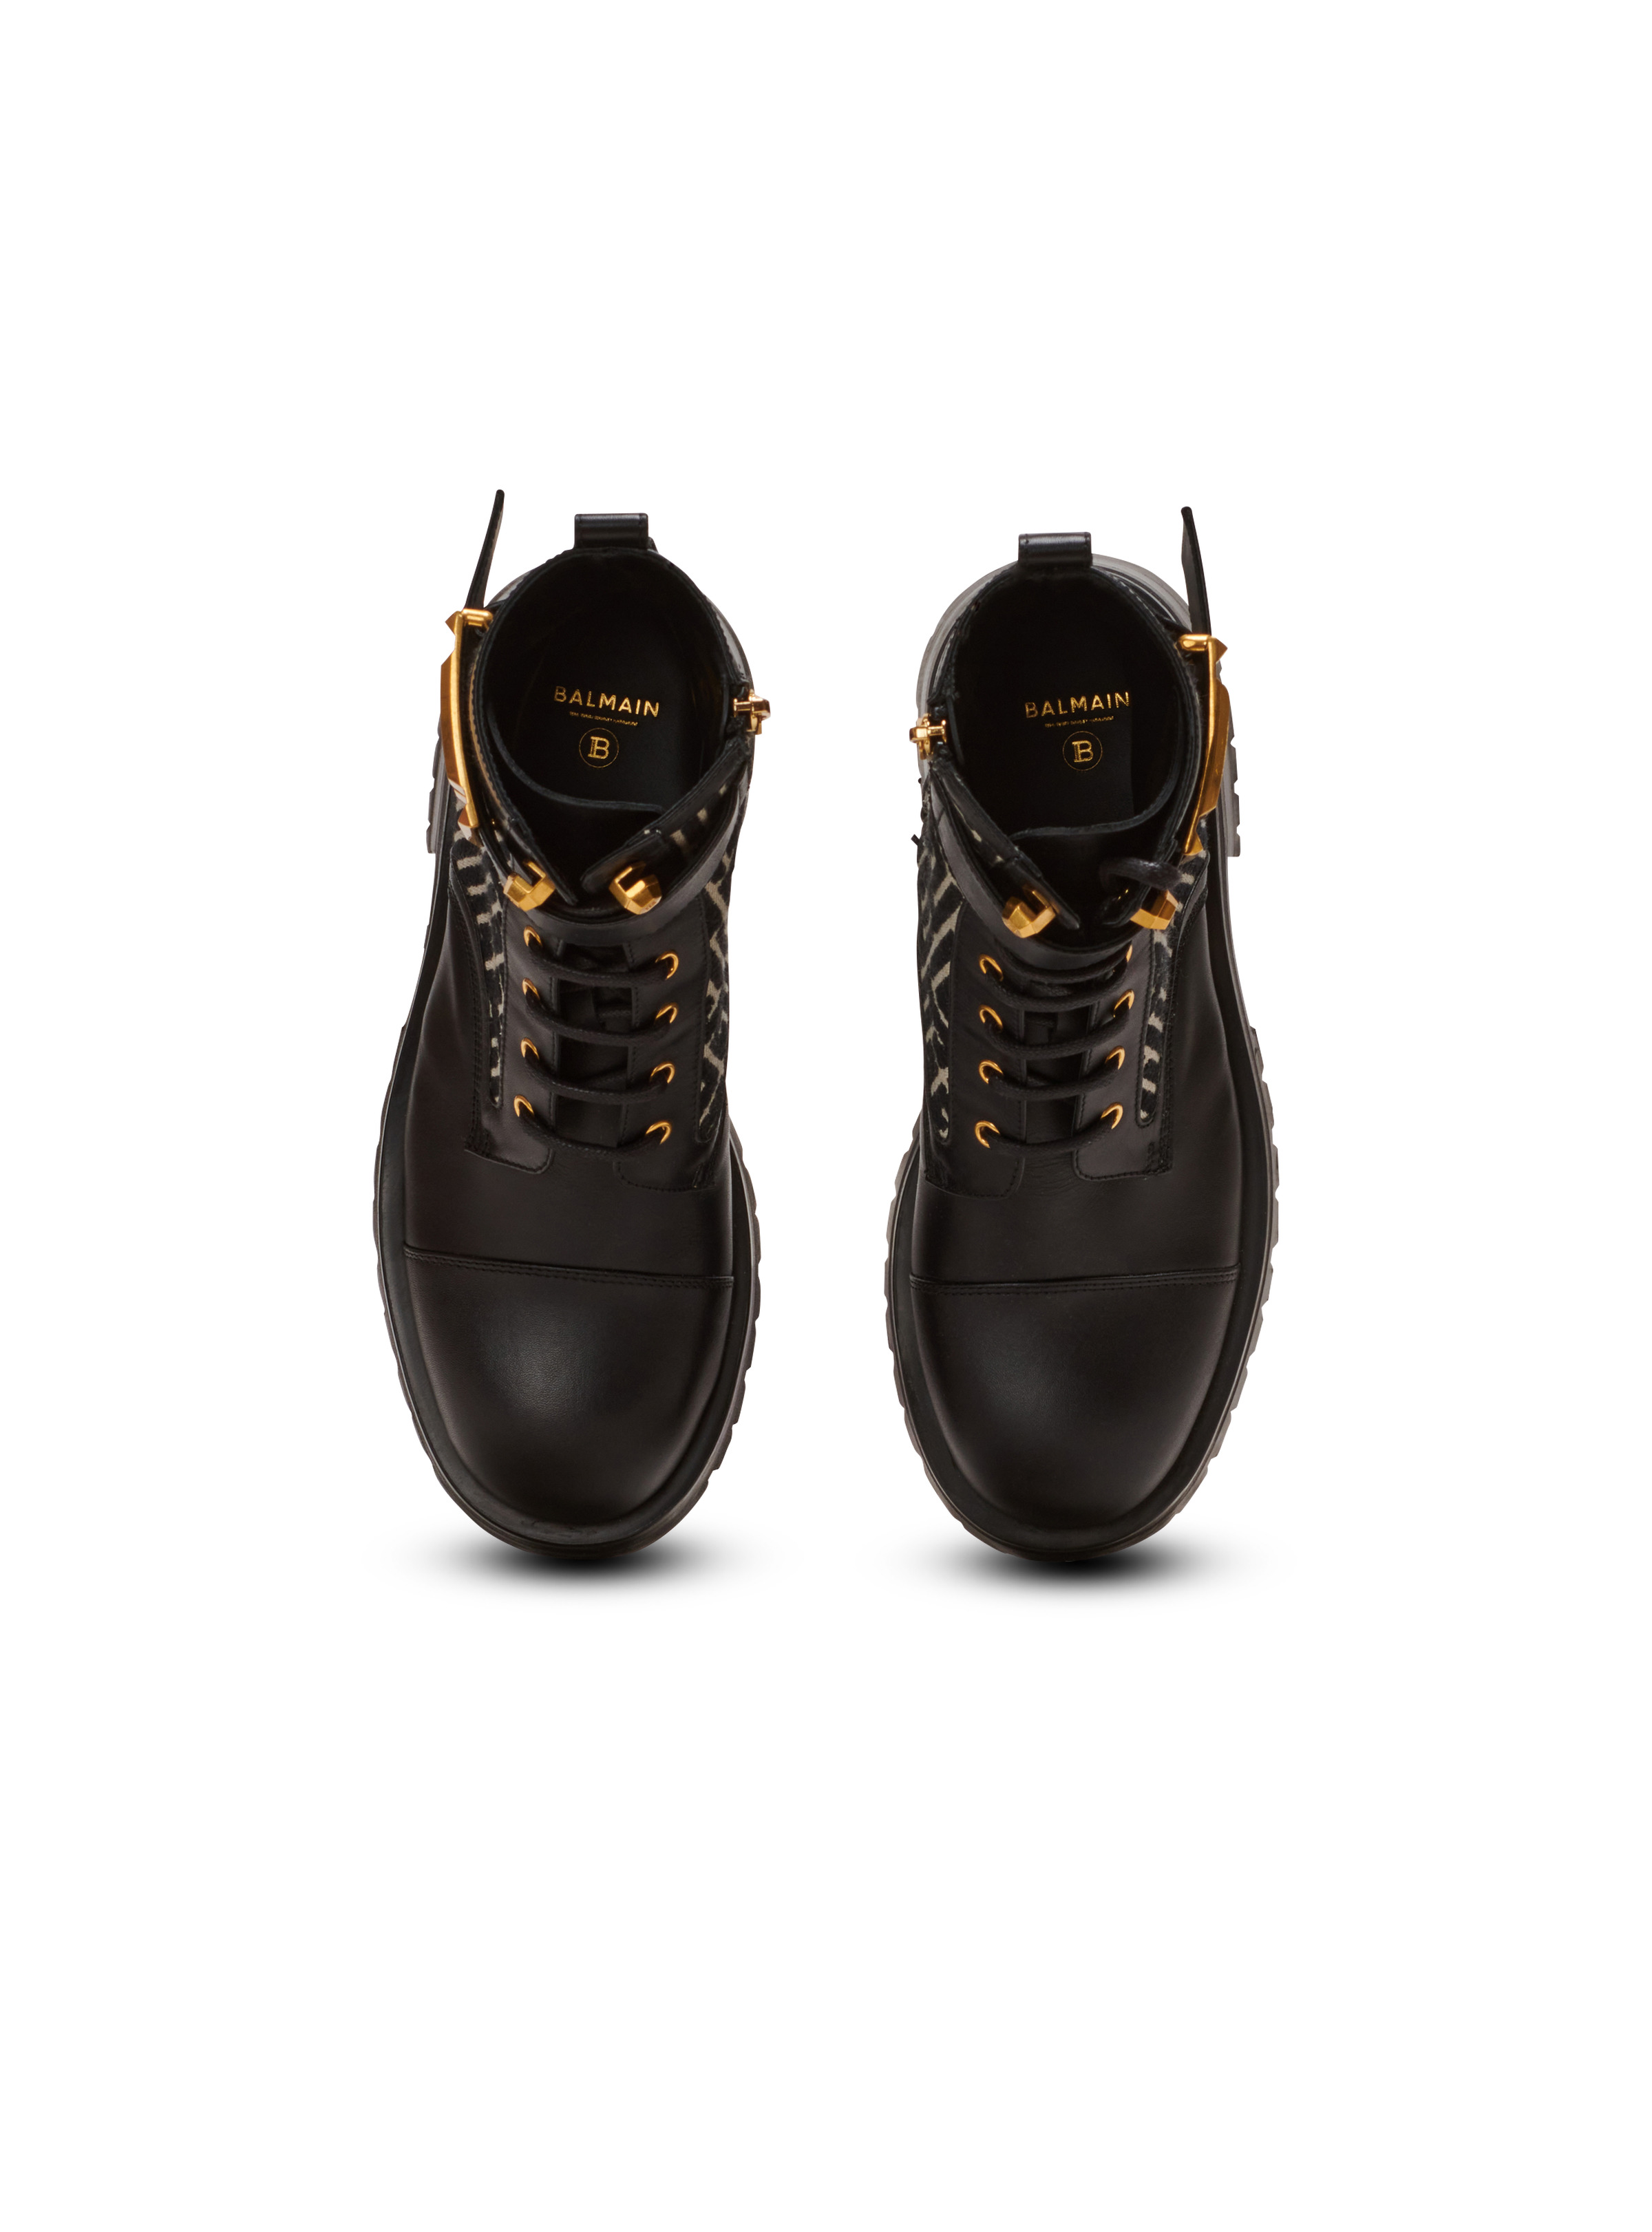 Charlie monogram jacquard and leather ranger boots - 3